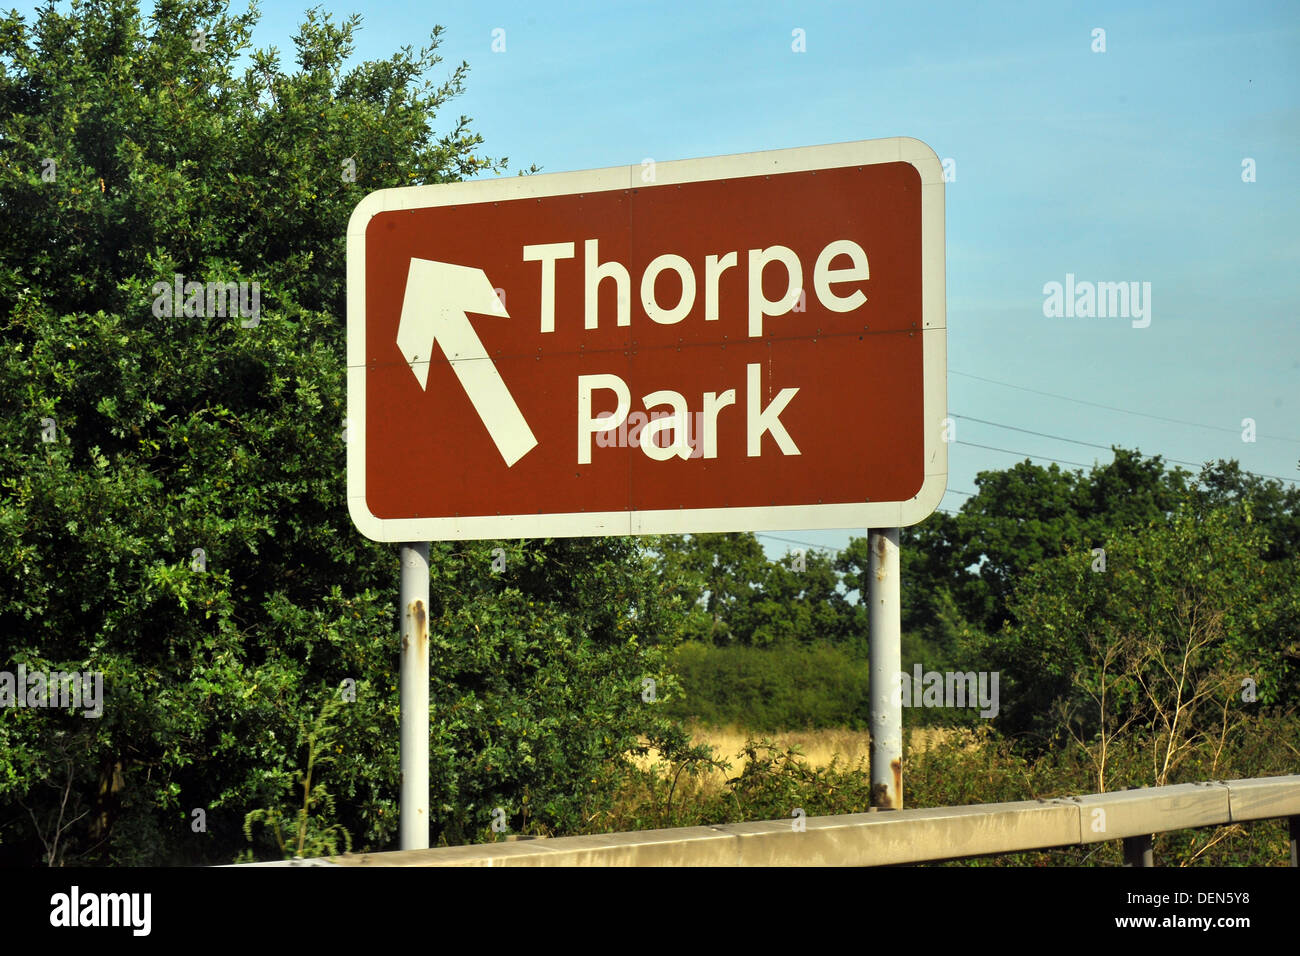 A brown British road sign directing traffic to Thorpe Park. Stock Photo